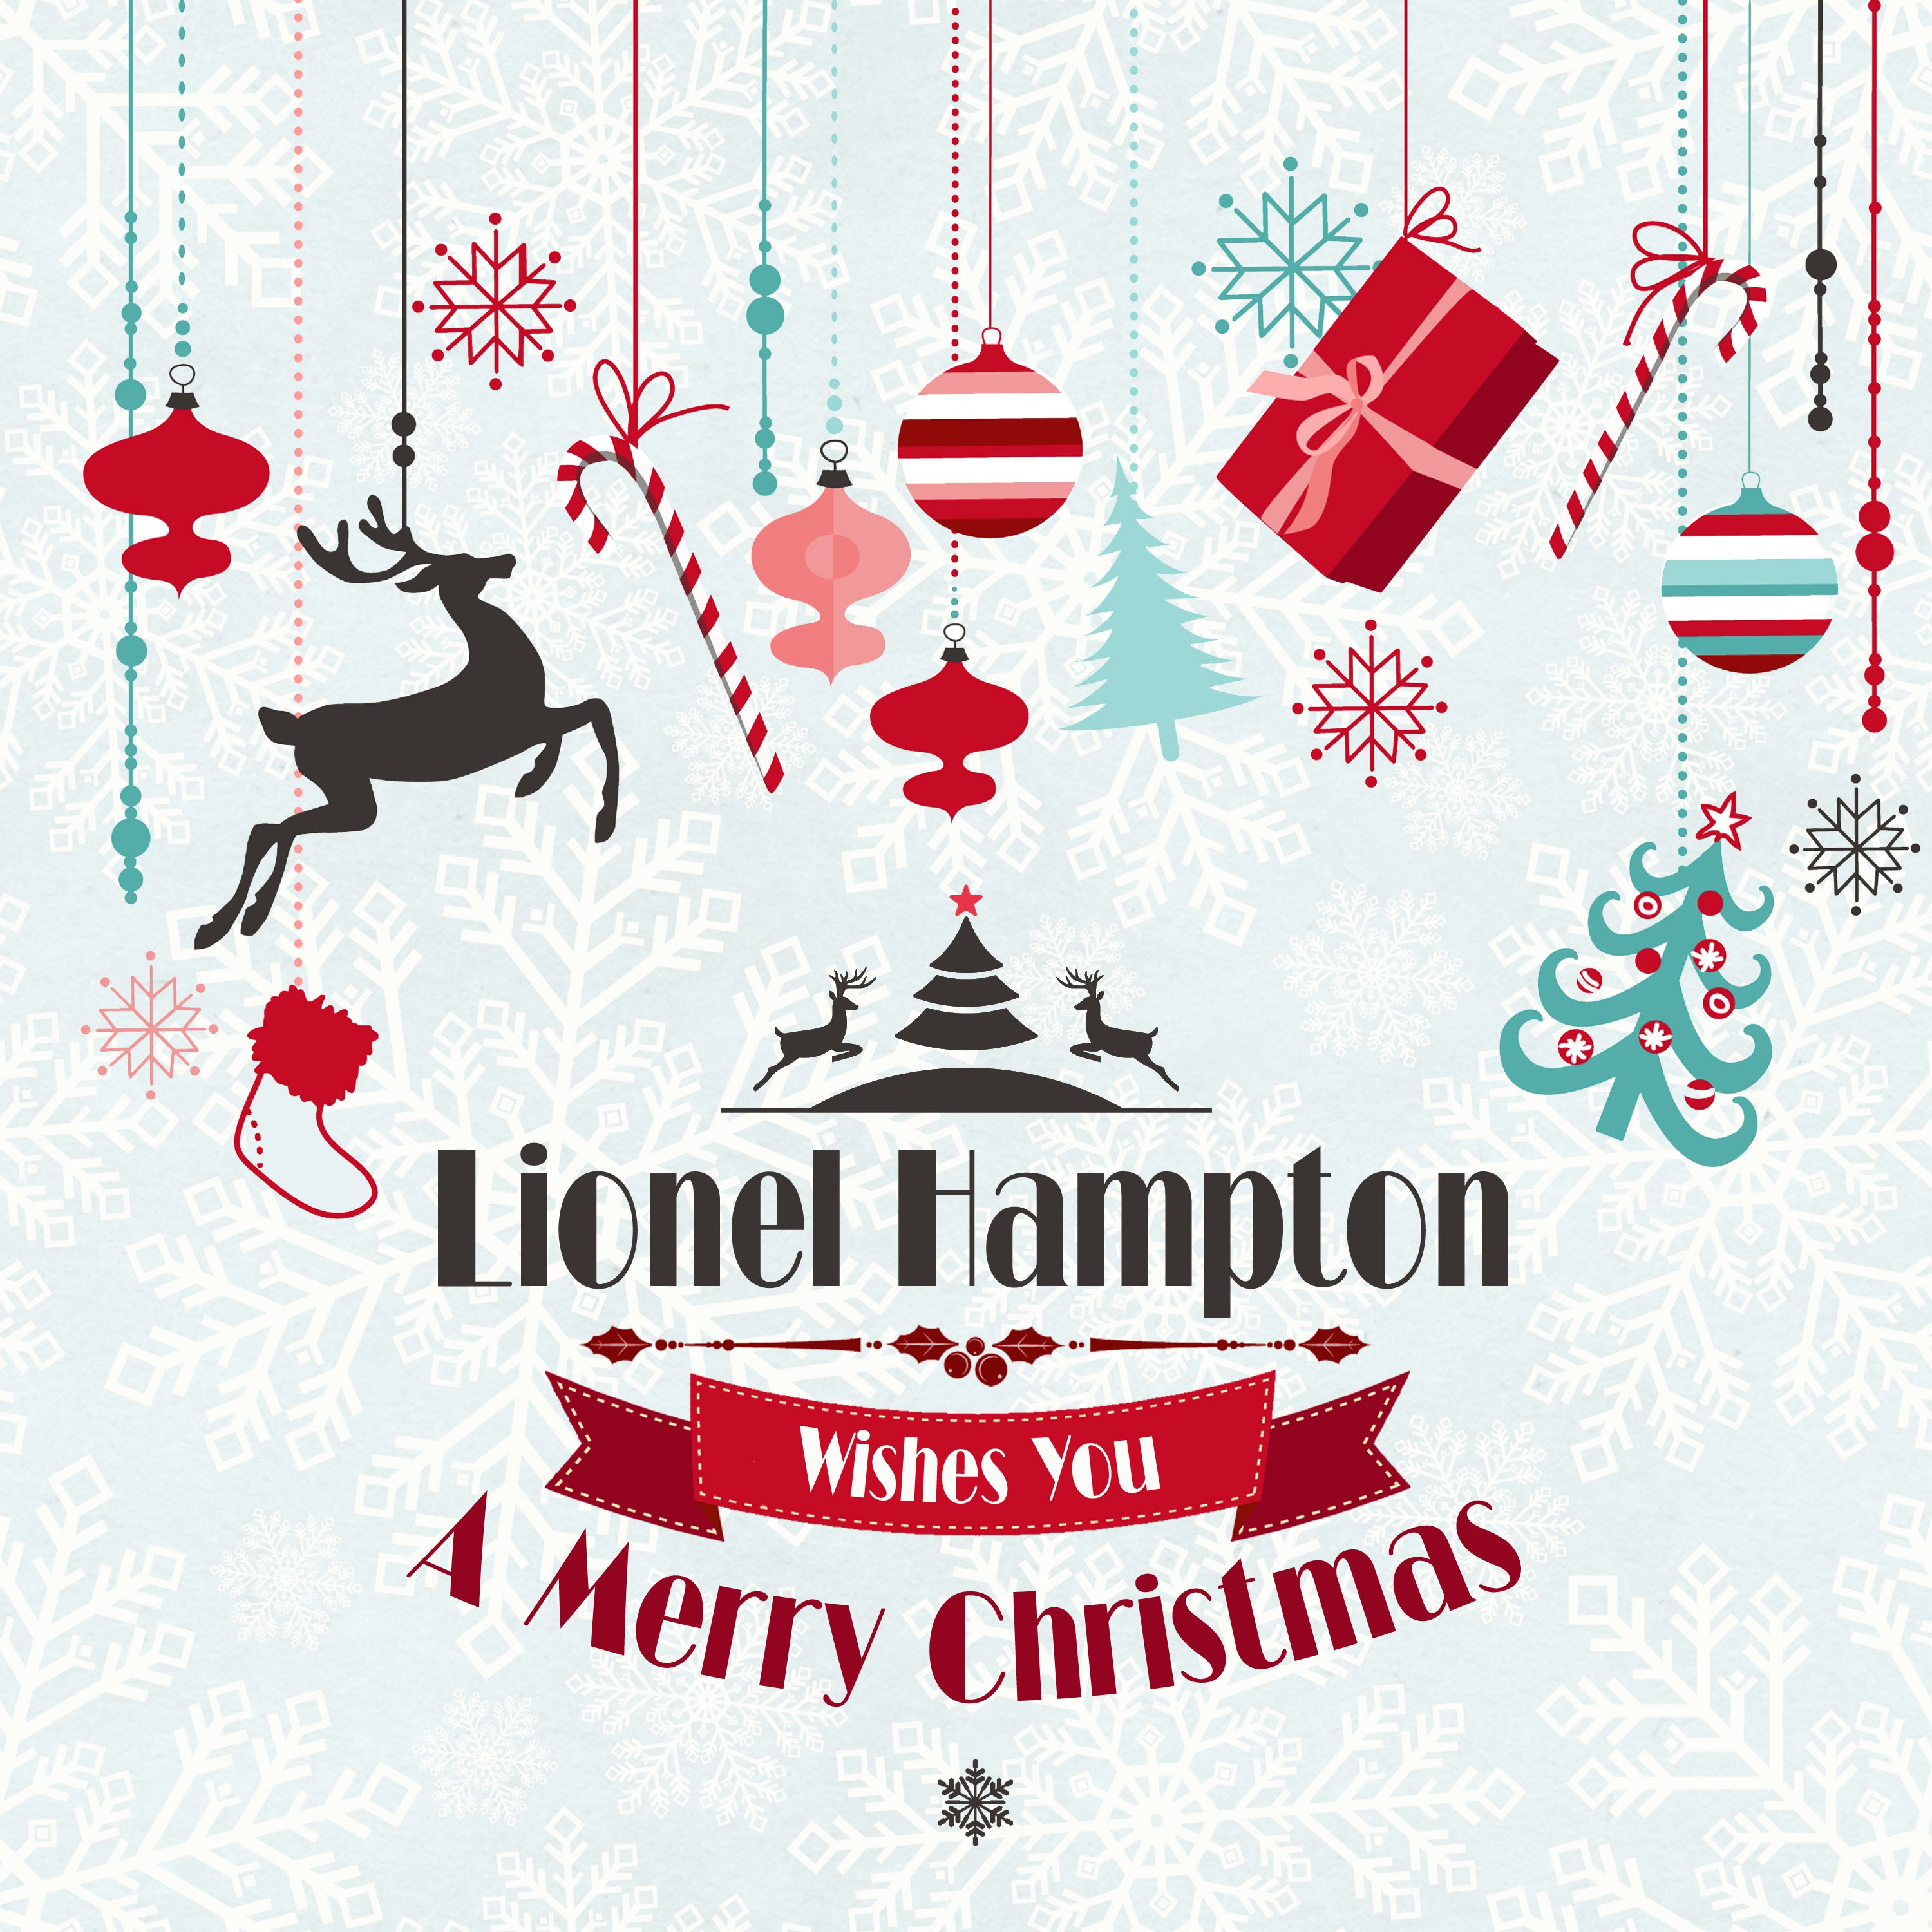 Lionel Hampton Wishes You a Merry Christmas